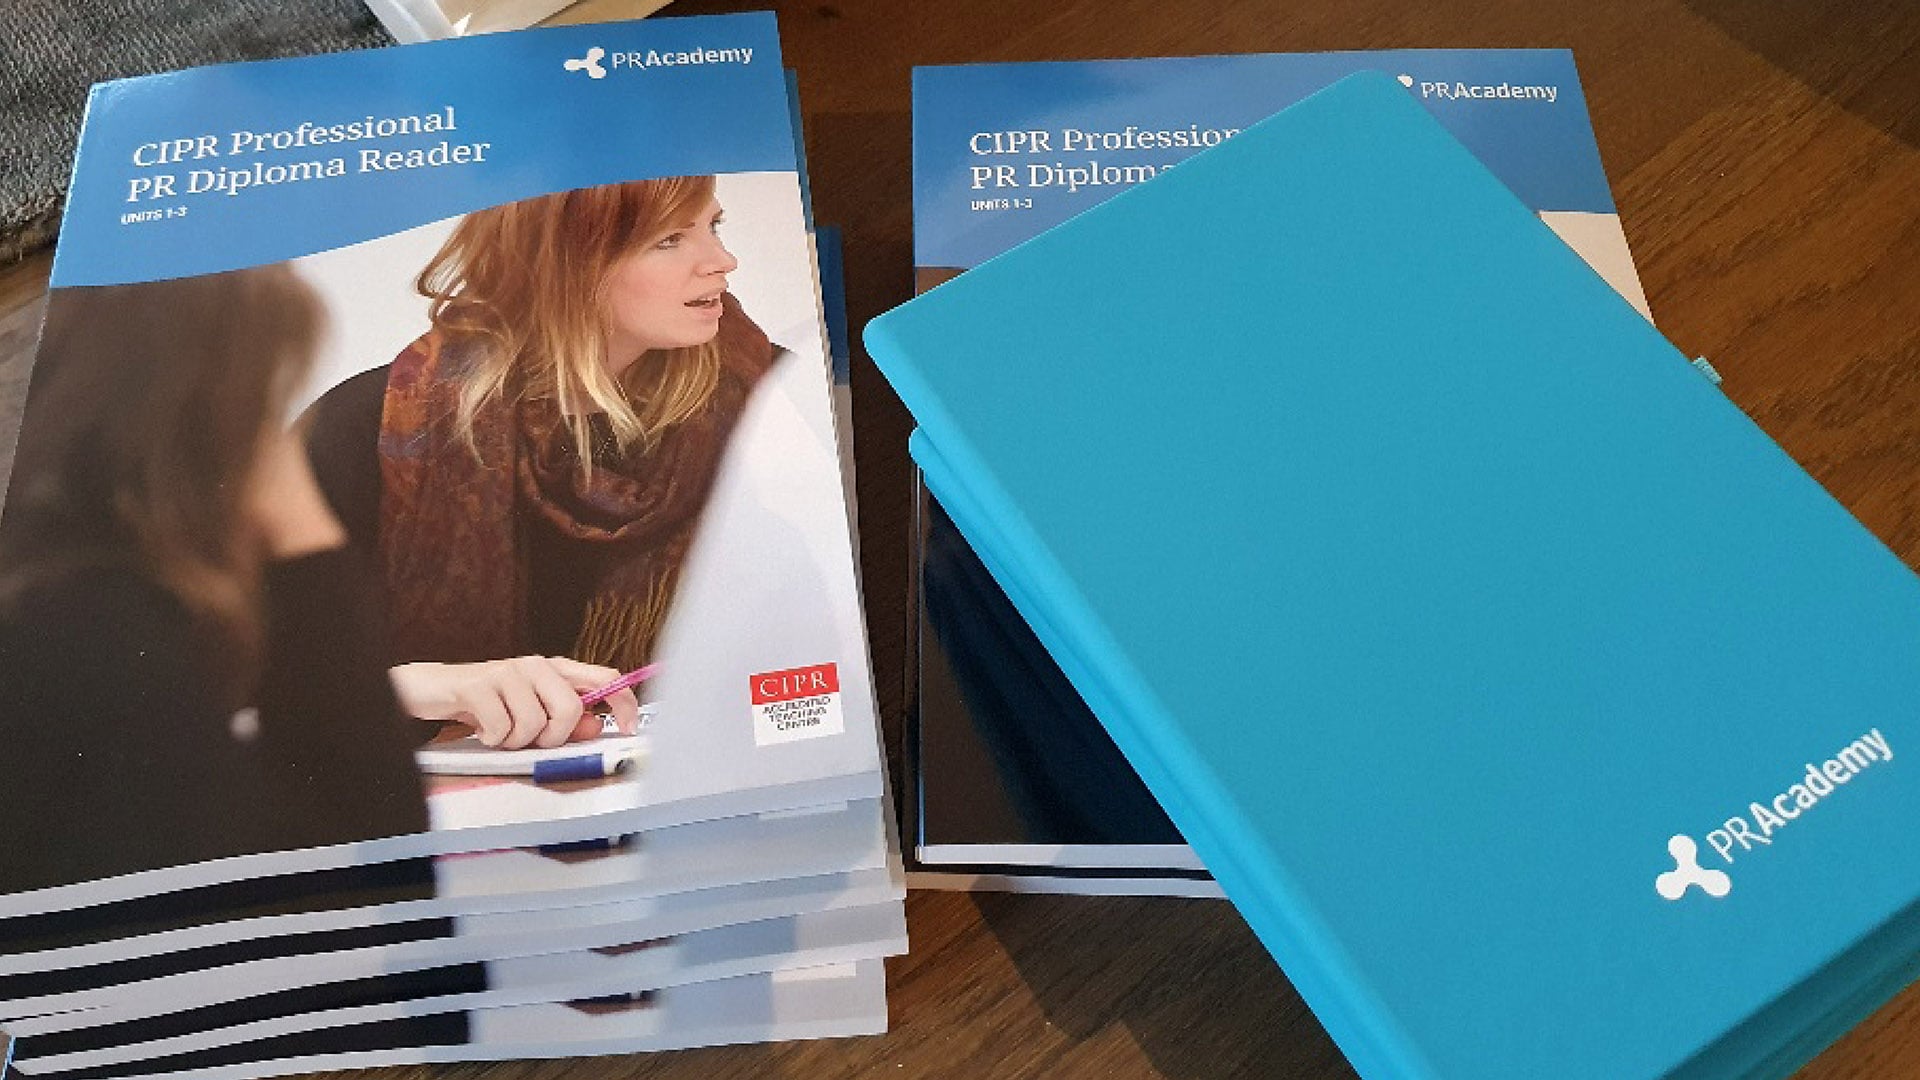 A photograph of a stack of blue PR Academy CIPR Professional PR Diploma Reader brochures and notebooks